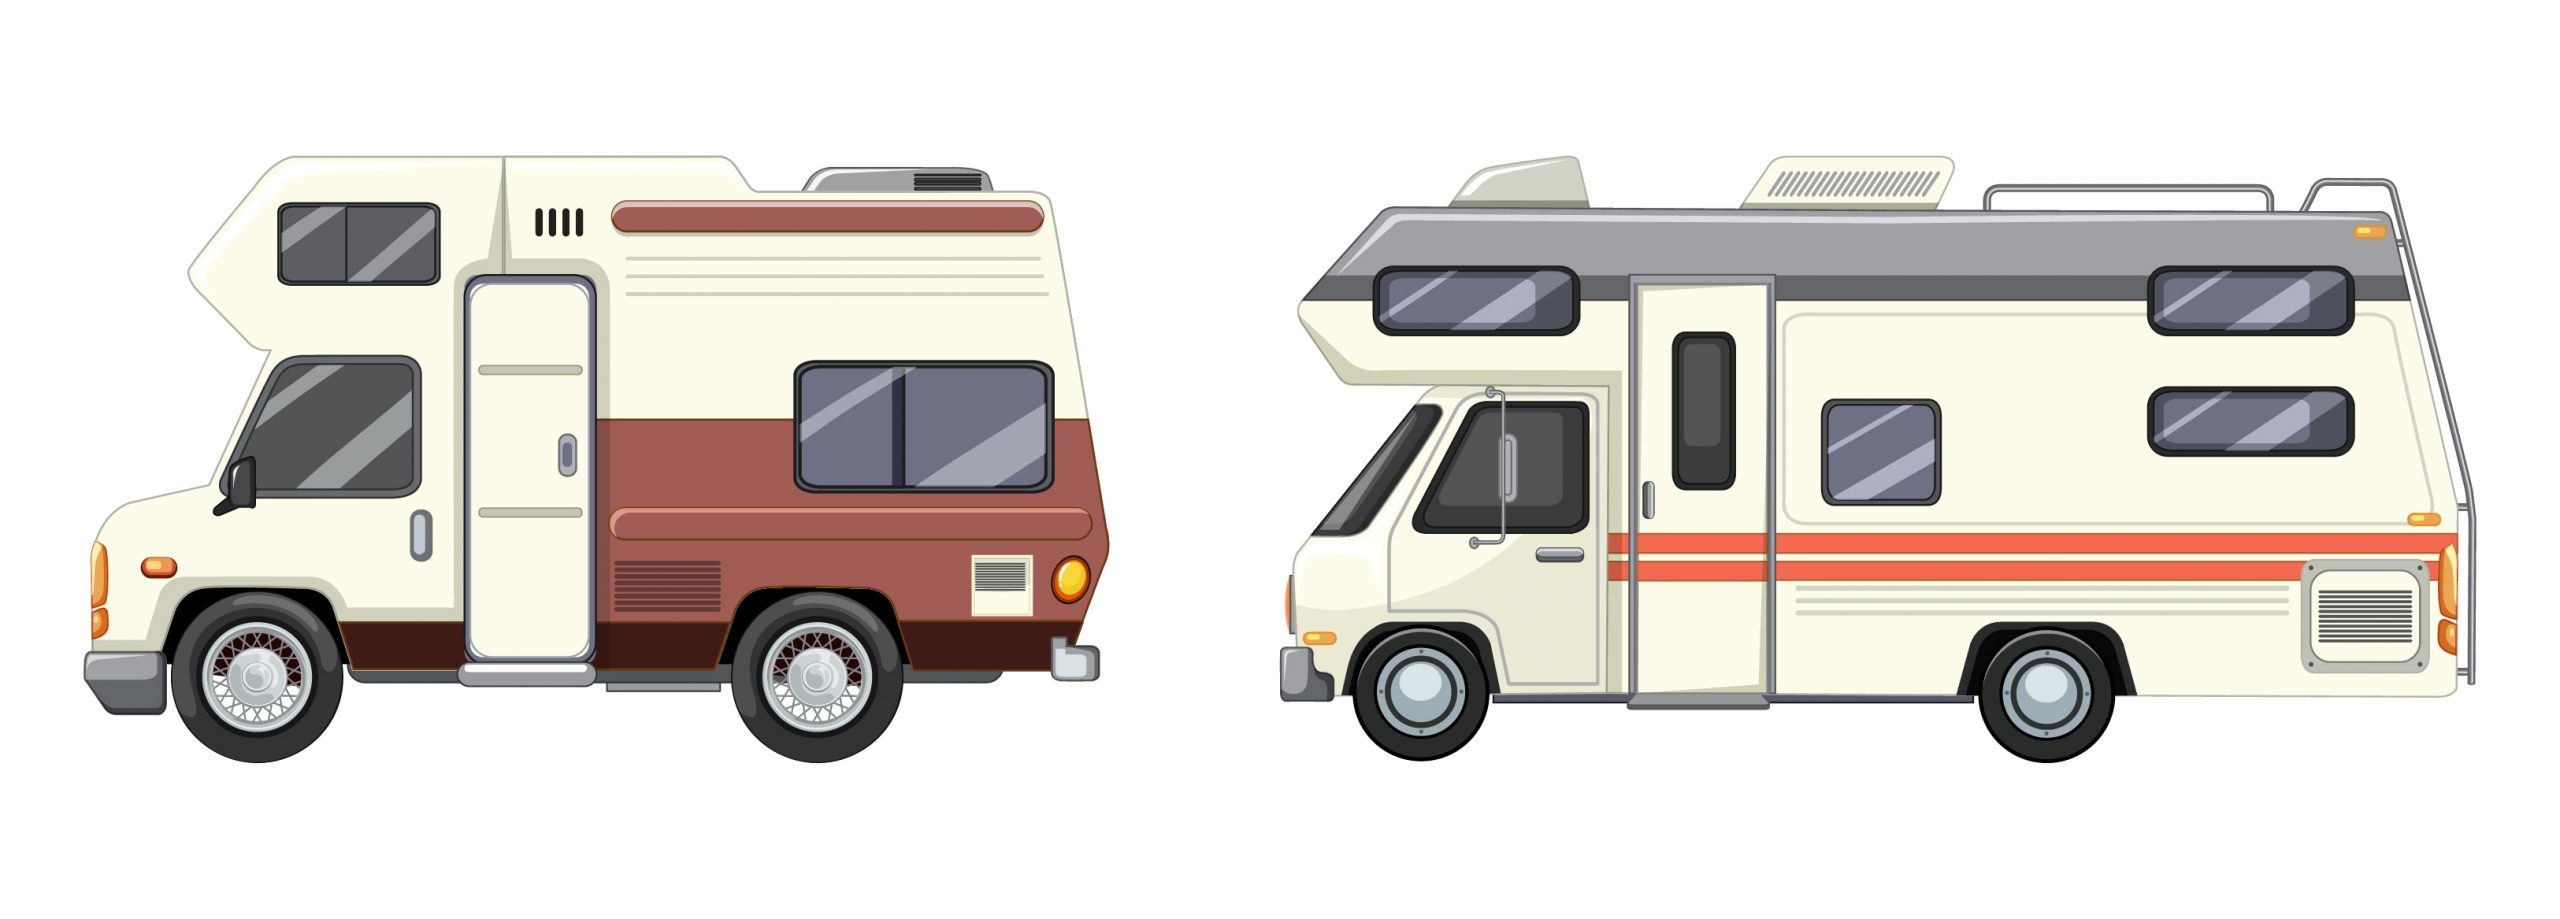 Towing an RVs / Motorhomes - Weights